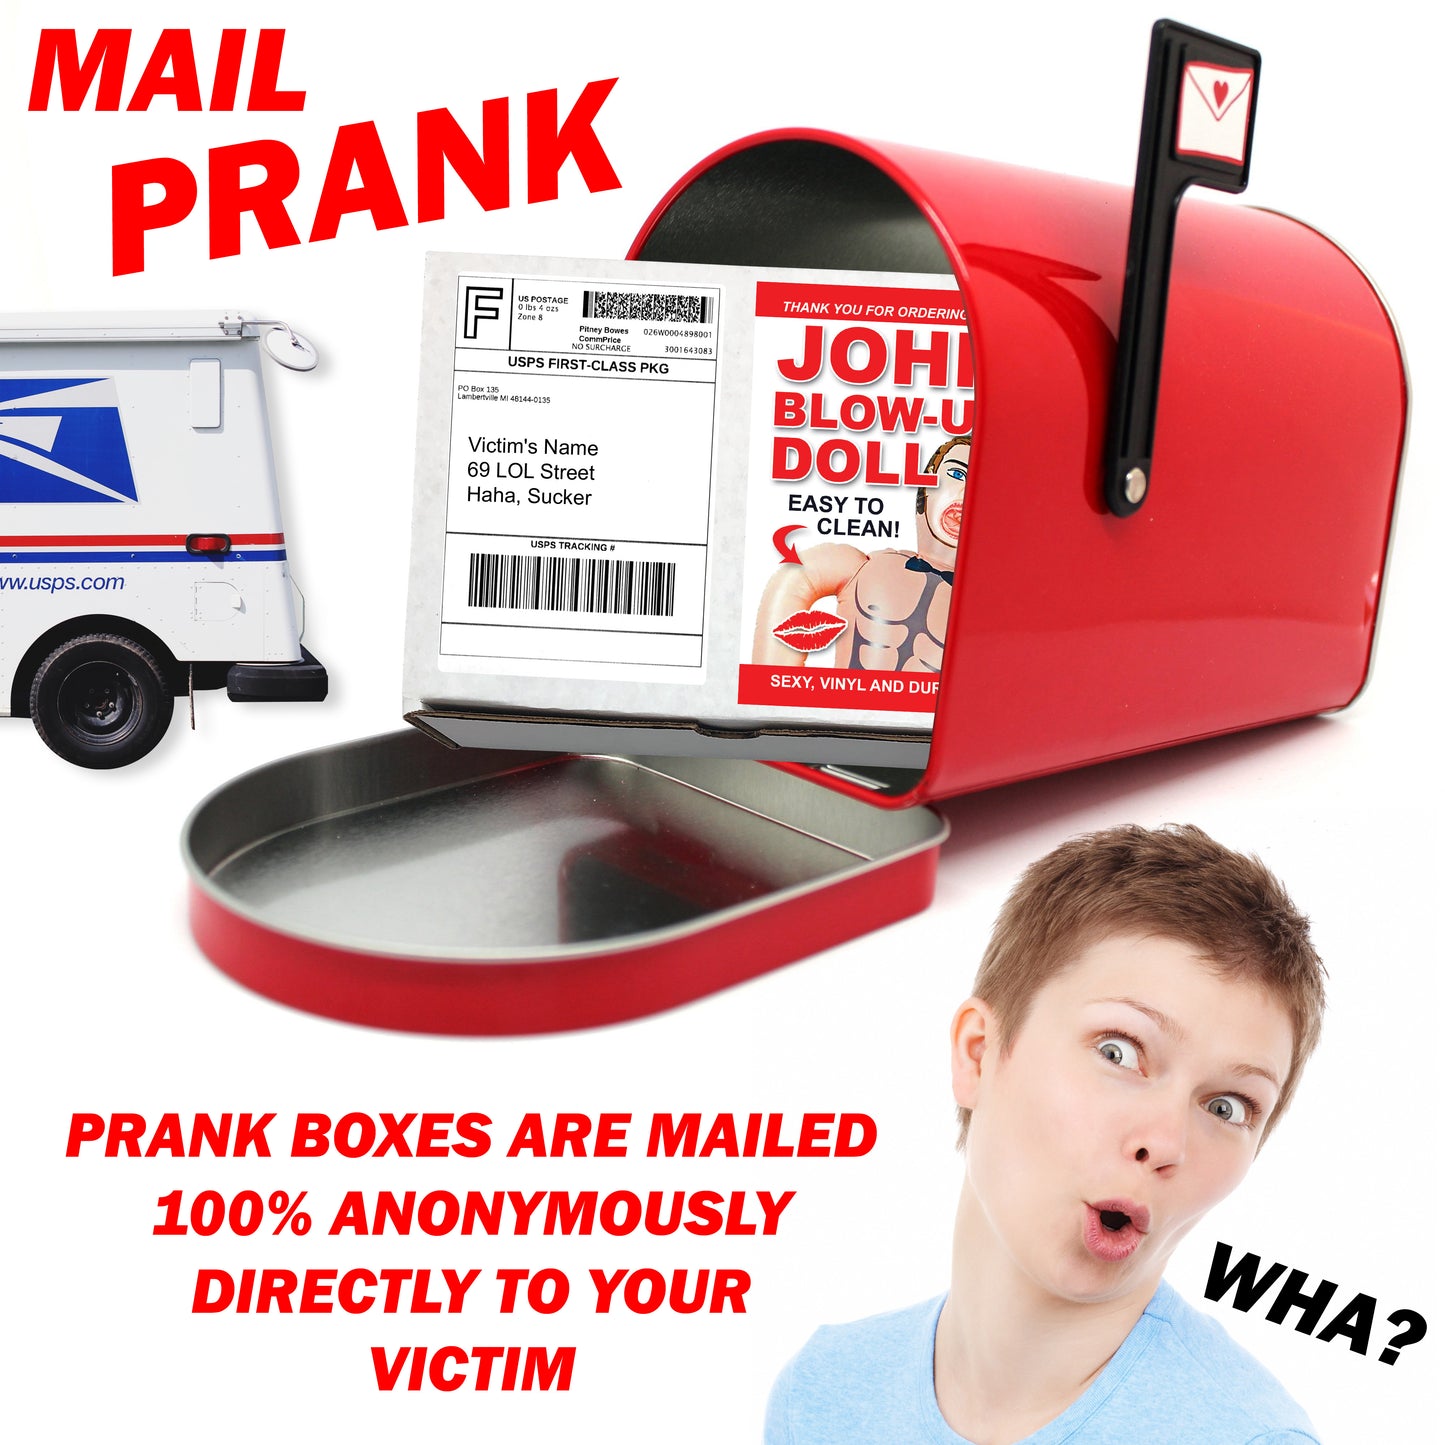 John Blow Up Doll embarrassing prank box gets mailed directly to your victims 100% anonymously!